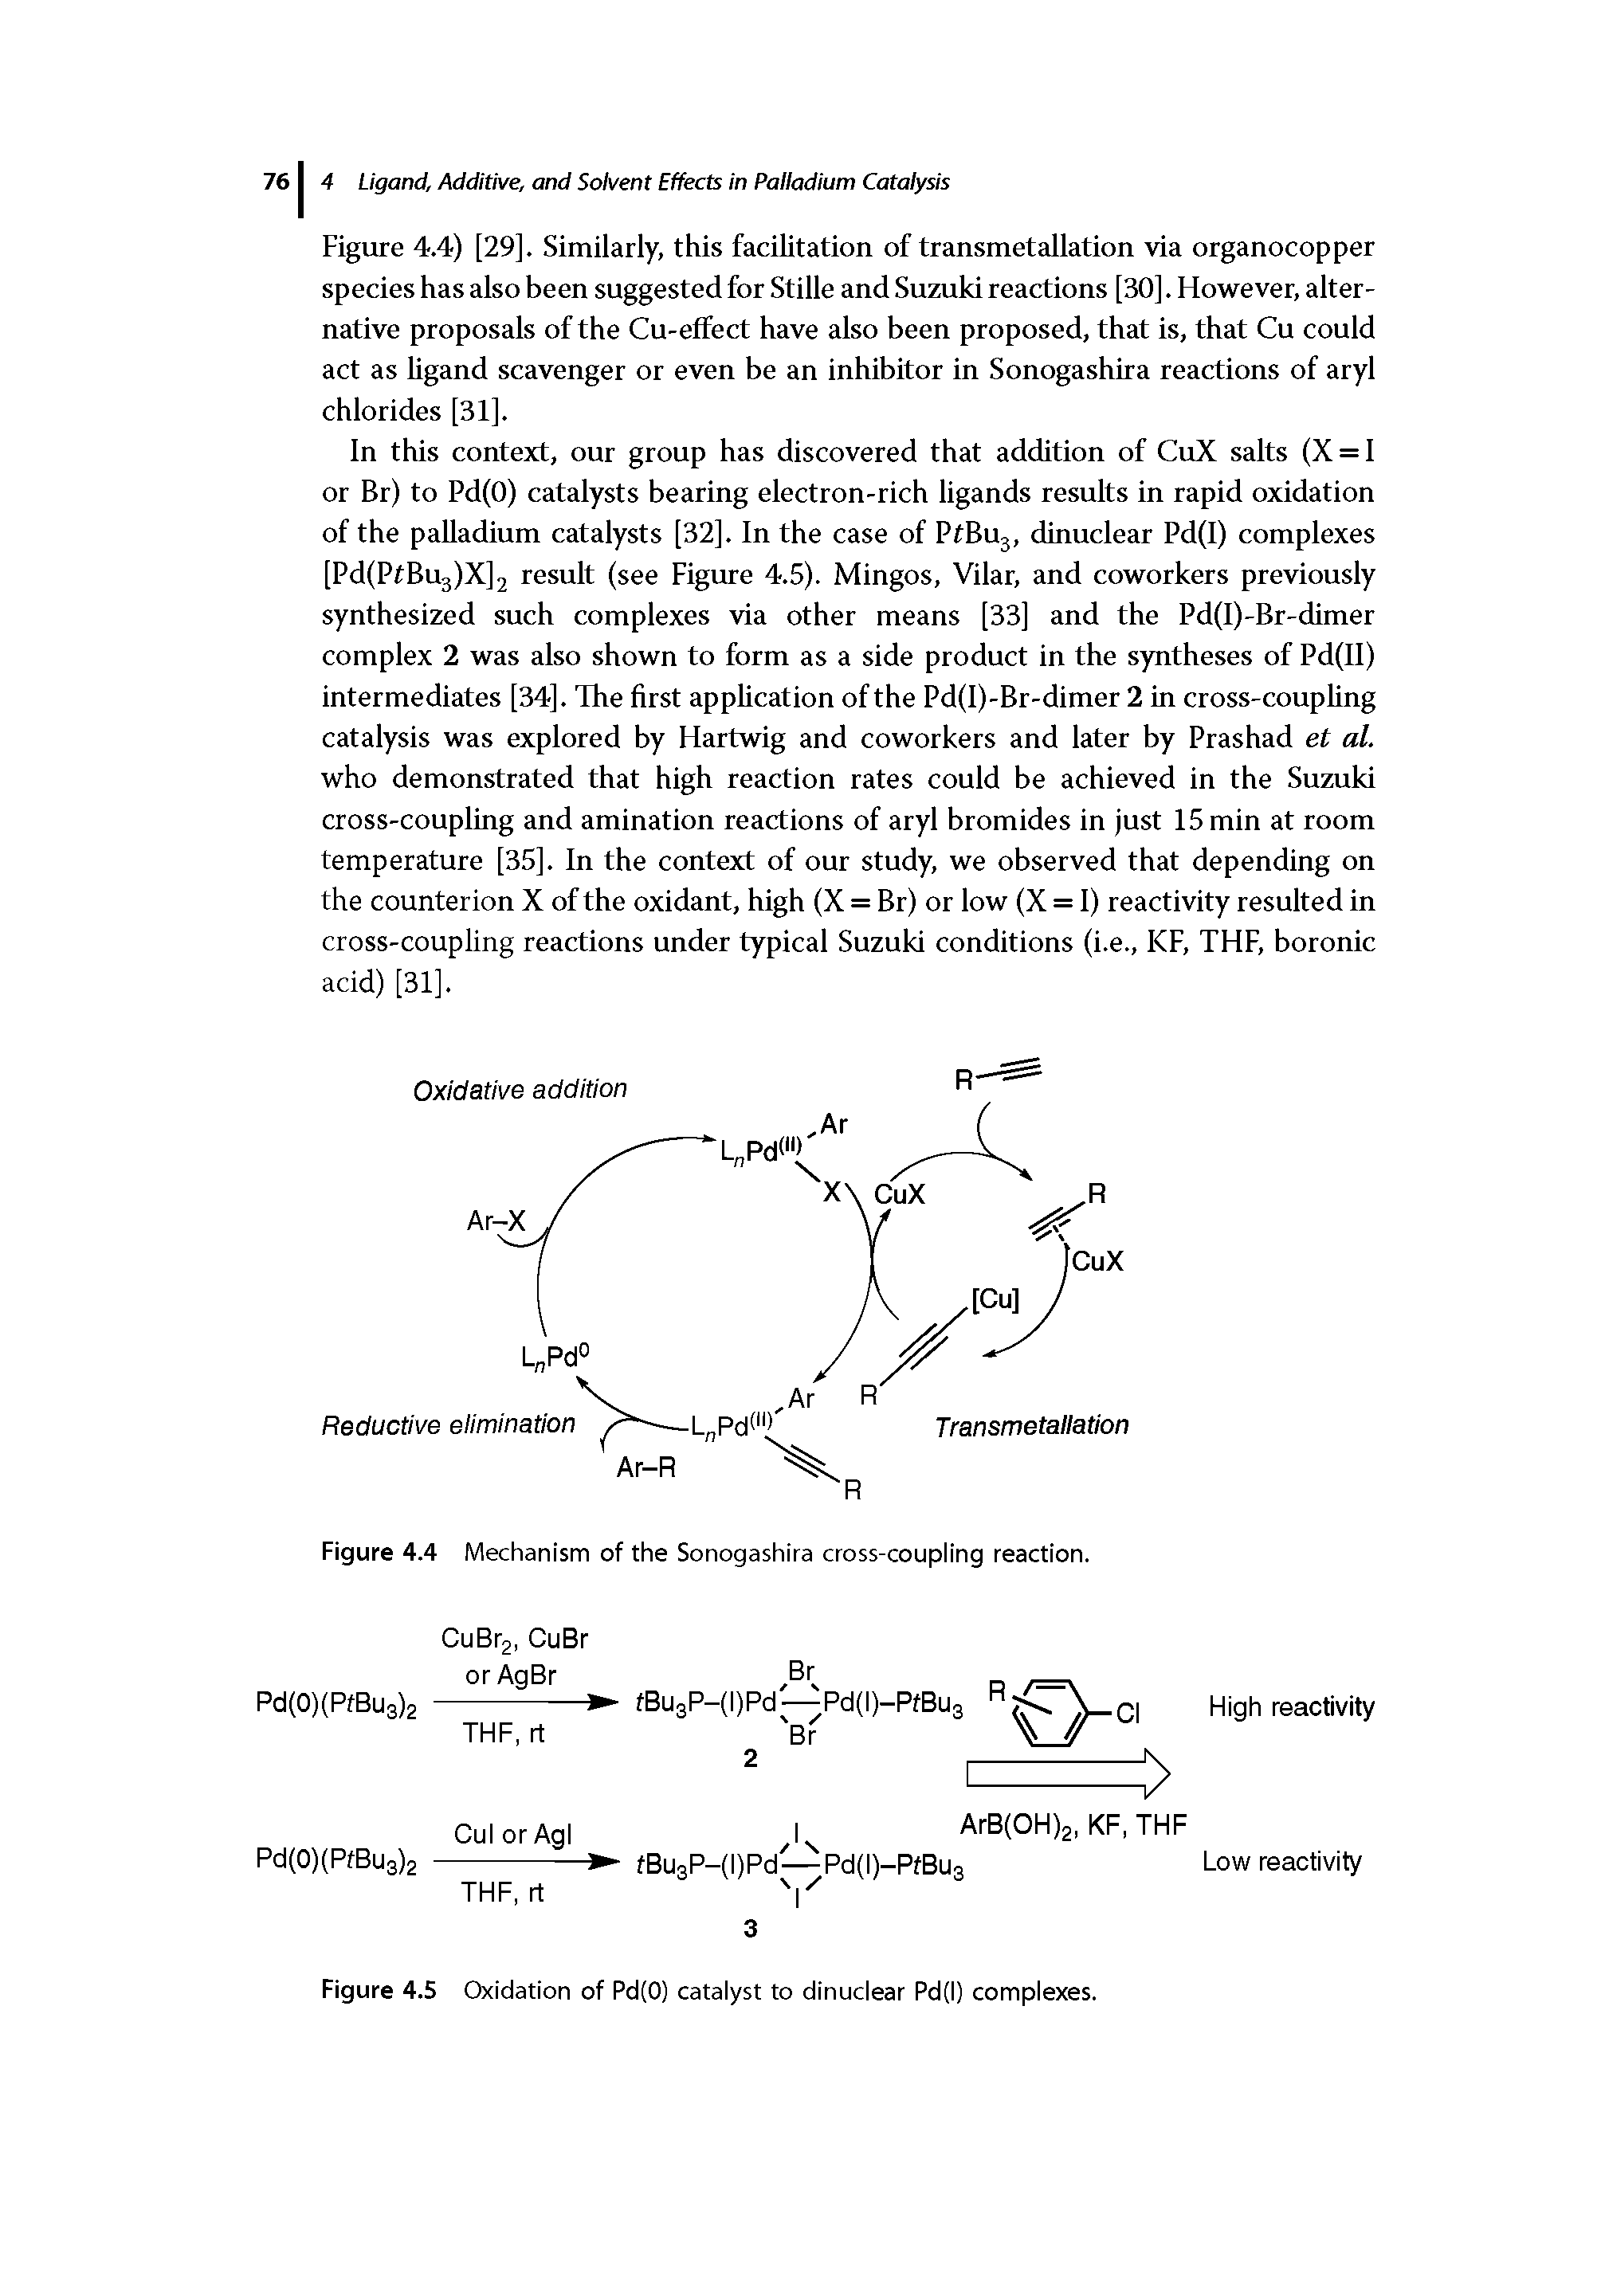 Figure 4.4) [29]. Similarly, this facilitation of transmetallation via organocopper species has also been suggested for Stille and Suzuki reactions [30]. However, alternative proposals of the Cu-effect have also been proposed, that is, that Cu could act as ligand scavenger or even be an inhibitor in Sonogashira reactions of aryl chlorides [31].